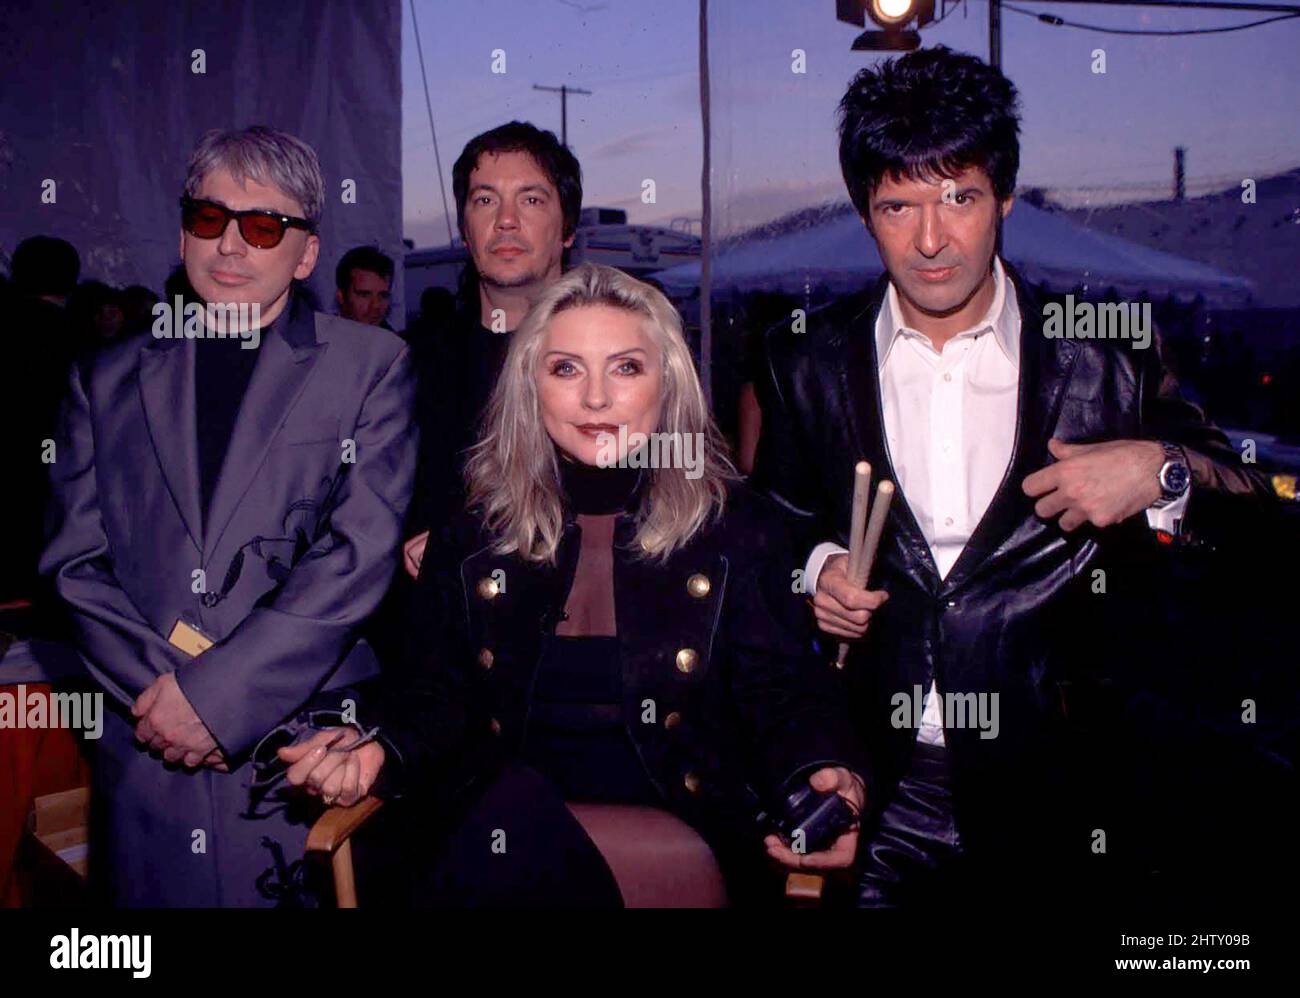 Blondie - Debbie Harry Performed on American Music Awards, 1999 Credit: Ron Wolfson / Rock Negatives / MediaPunch Stock Photo